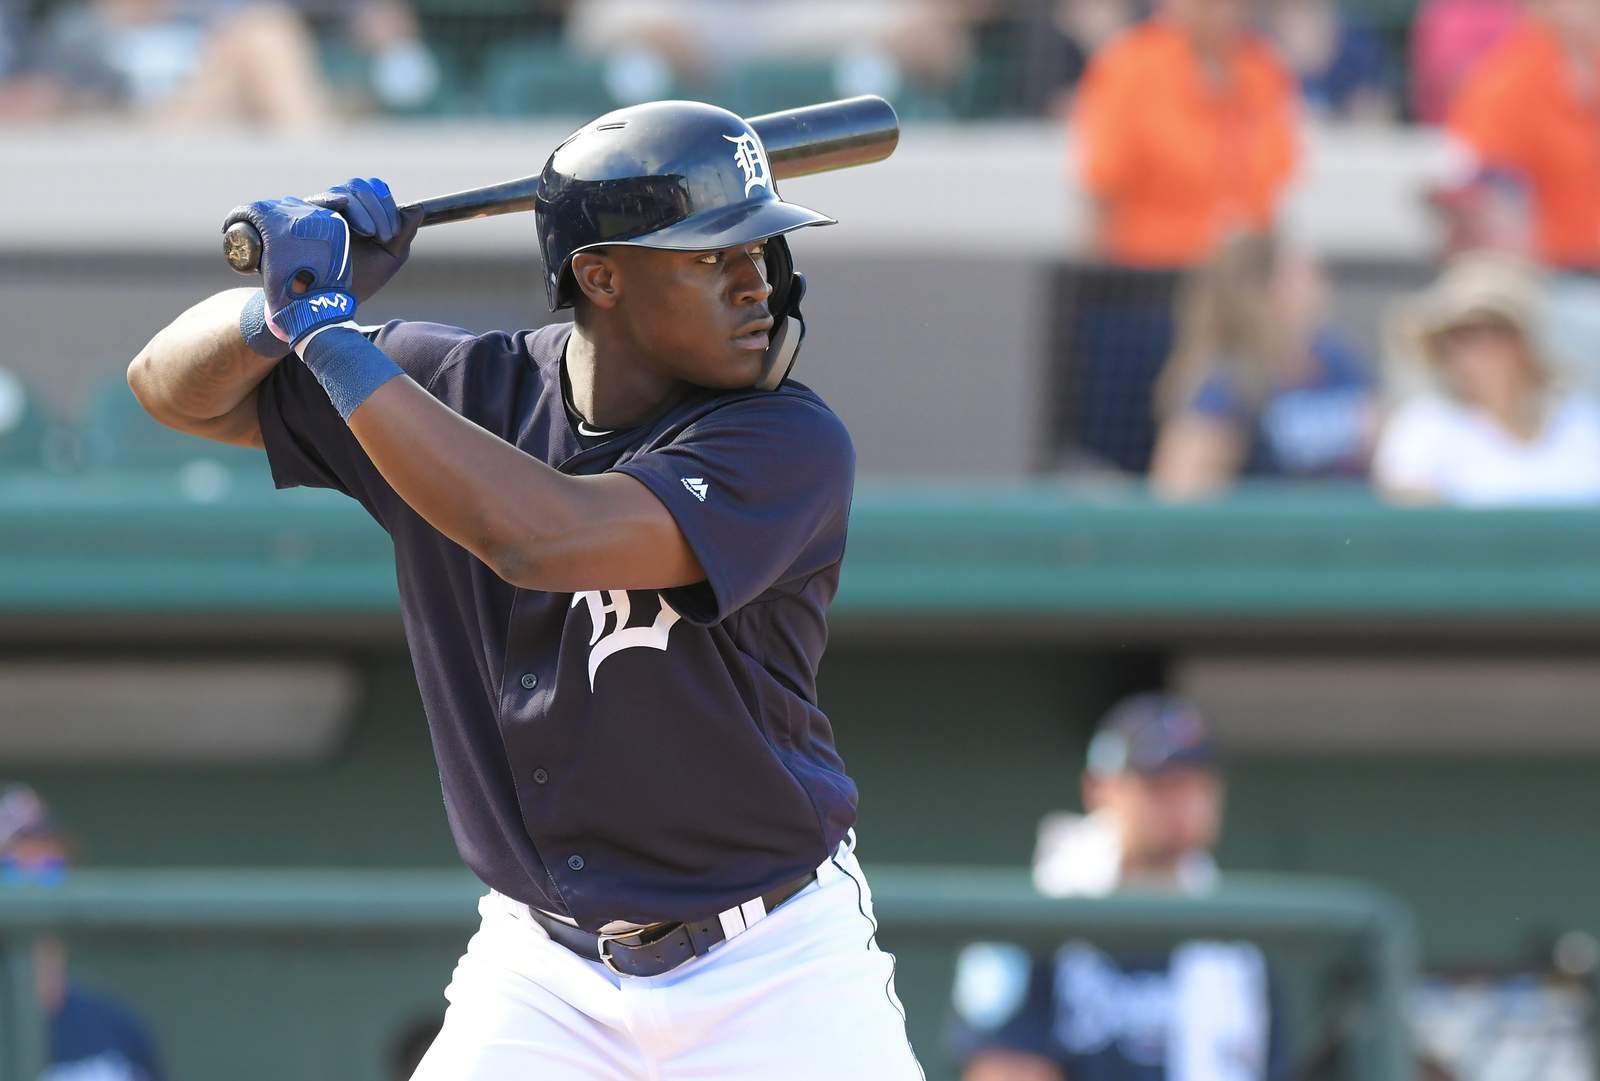 Detroit Tigers call up outfield prospect Daz Cameron after demoting Christin Stewart